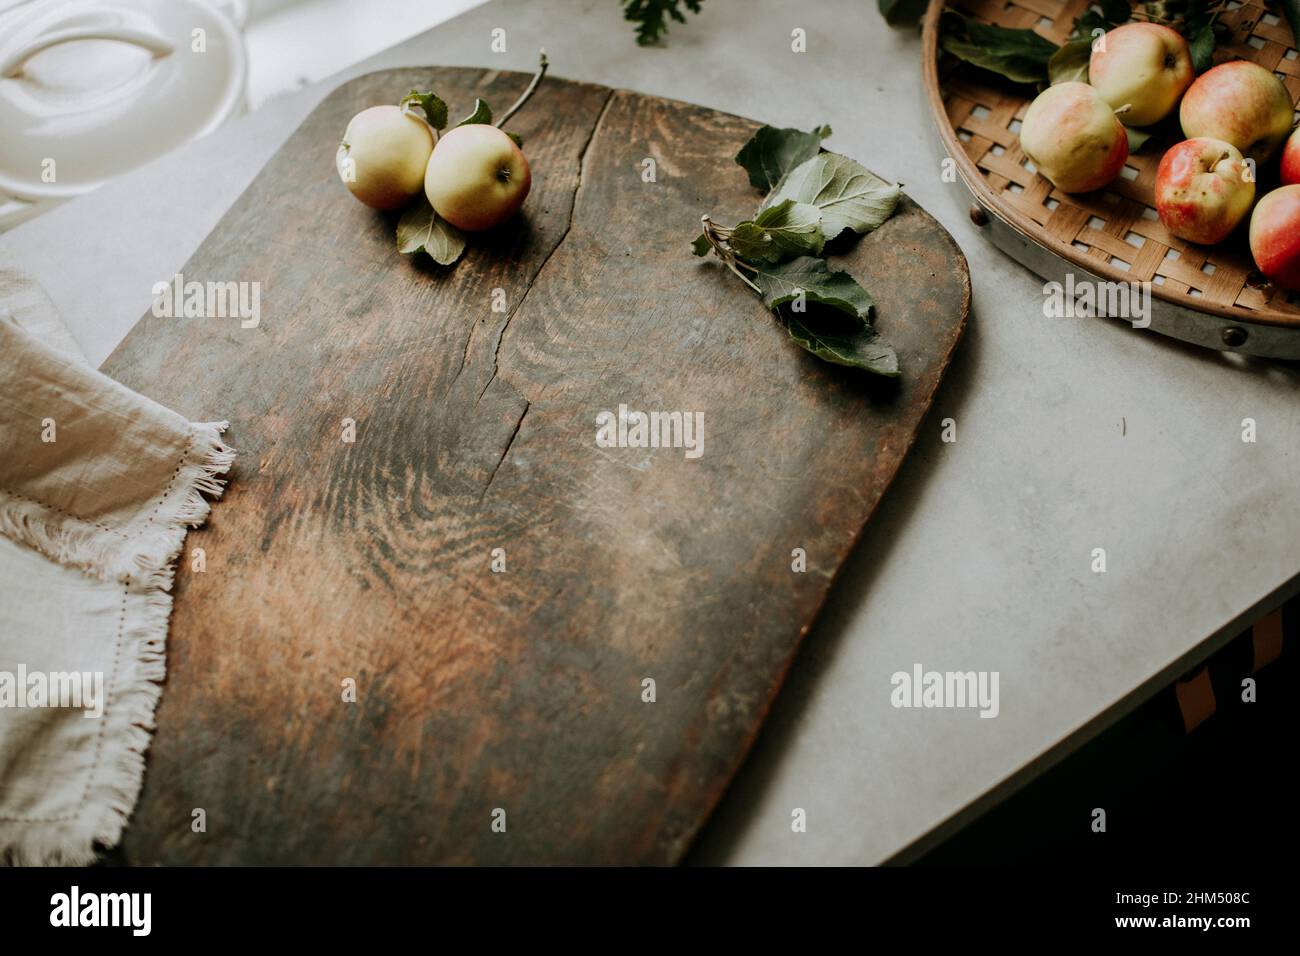 Wooden cutting board and apples Stock Photo